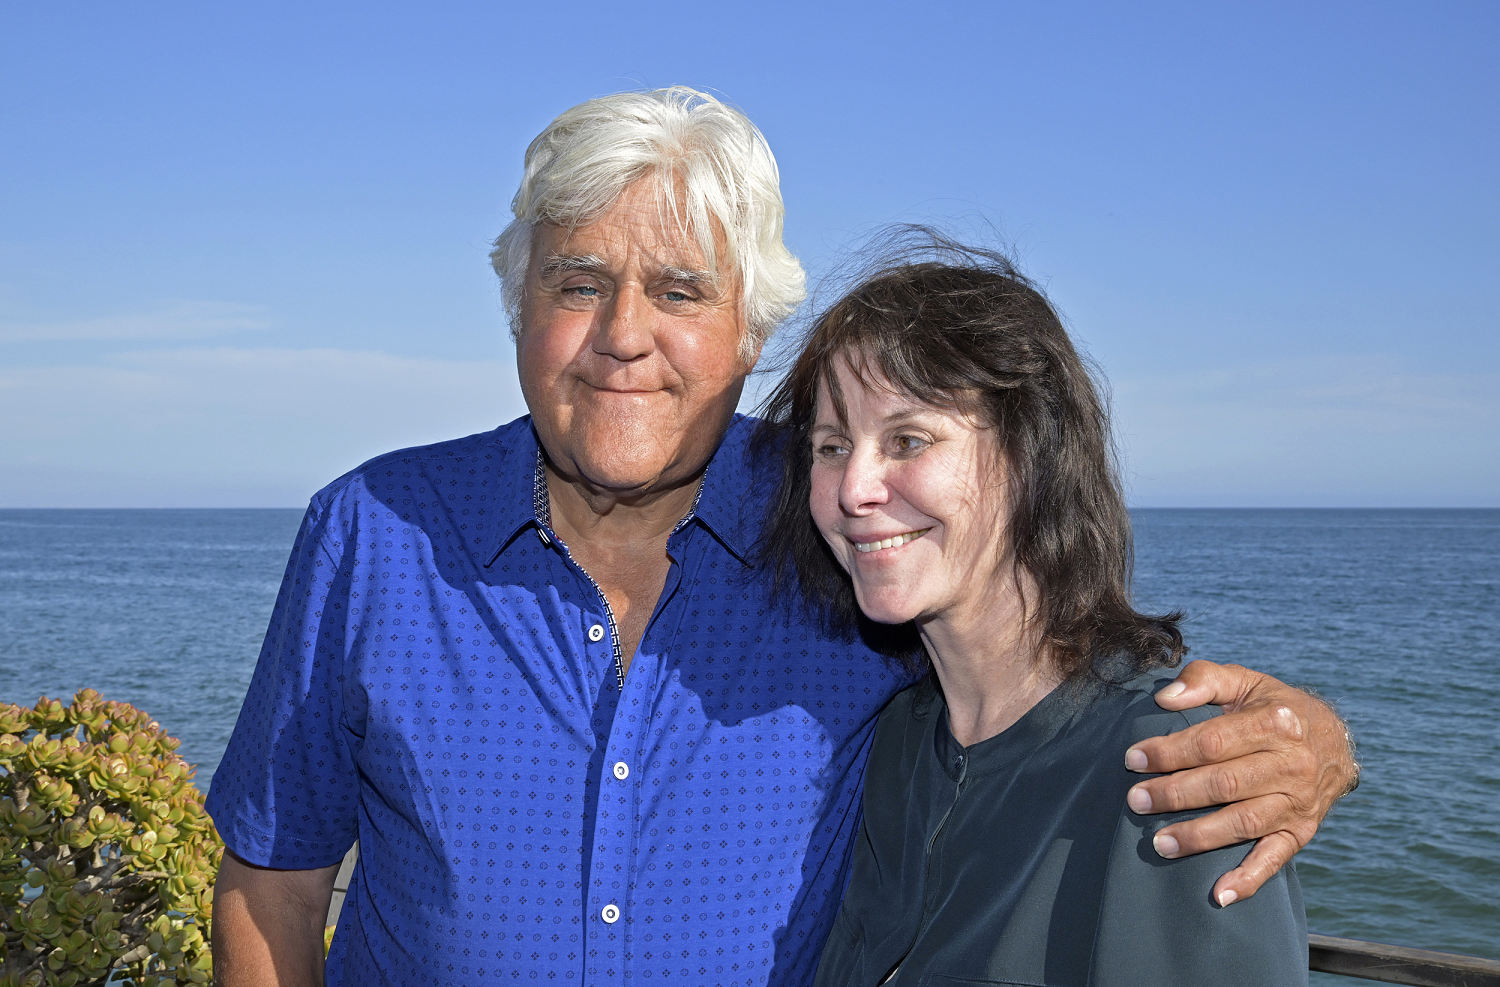 Jay Leno granted conservatorship of his wife’s estate following dementia diagnosis